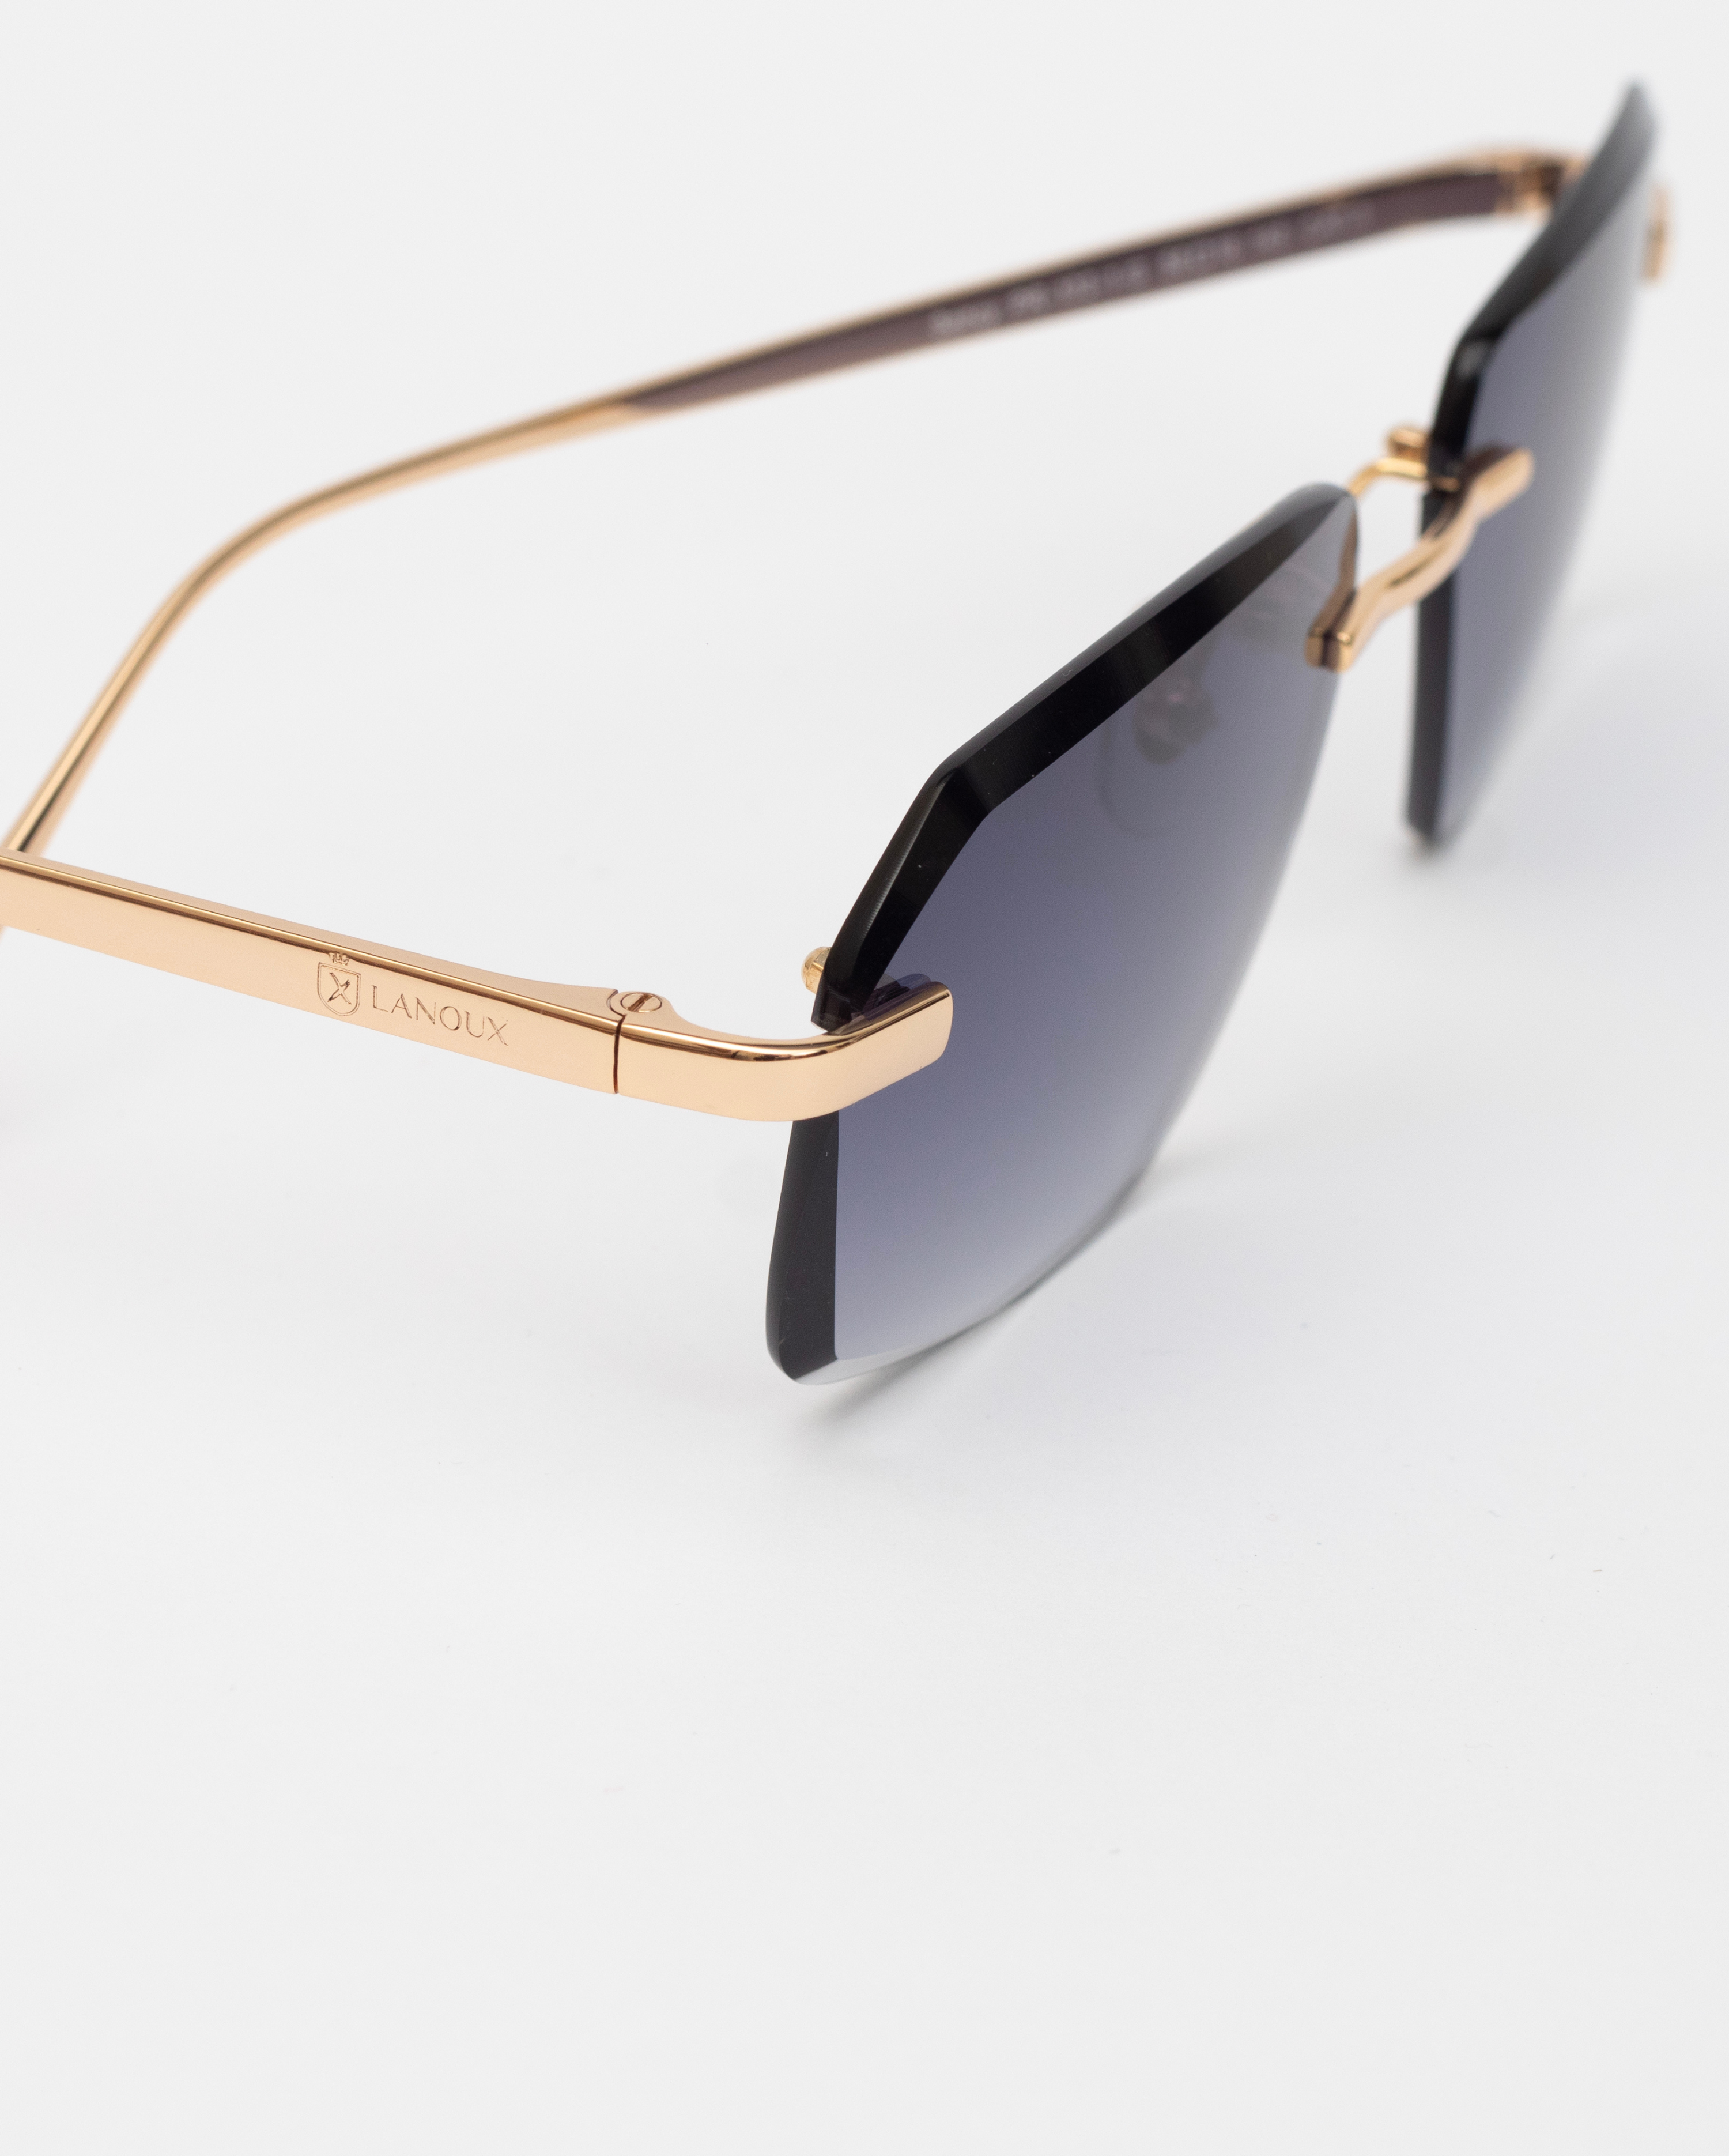 The 'Sancy' model sunglasses are designed with a blue light filter, featured in gradient grey lenses, and supported by 18k gold frames that boast a meticulous diamond cut. The side angle emphasizes the slender gold arm and the elegant Lanoux logo, all against a stark white background that enhances the glasses' sophisticated features.